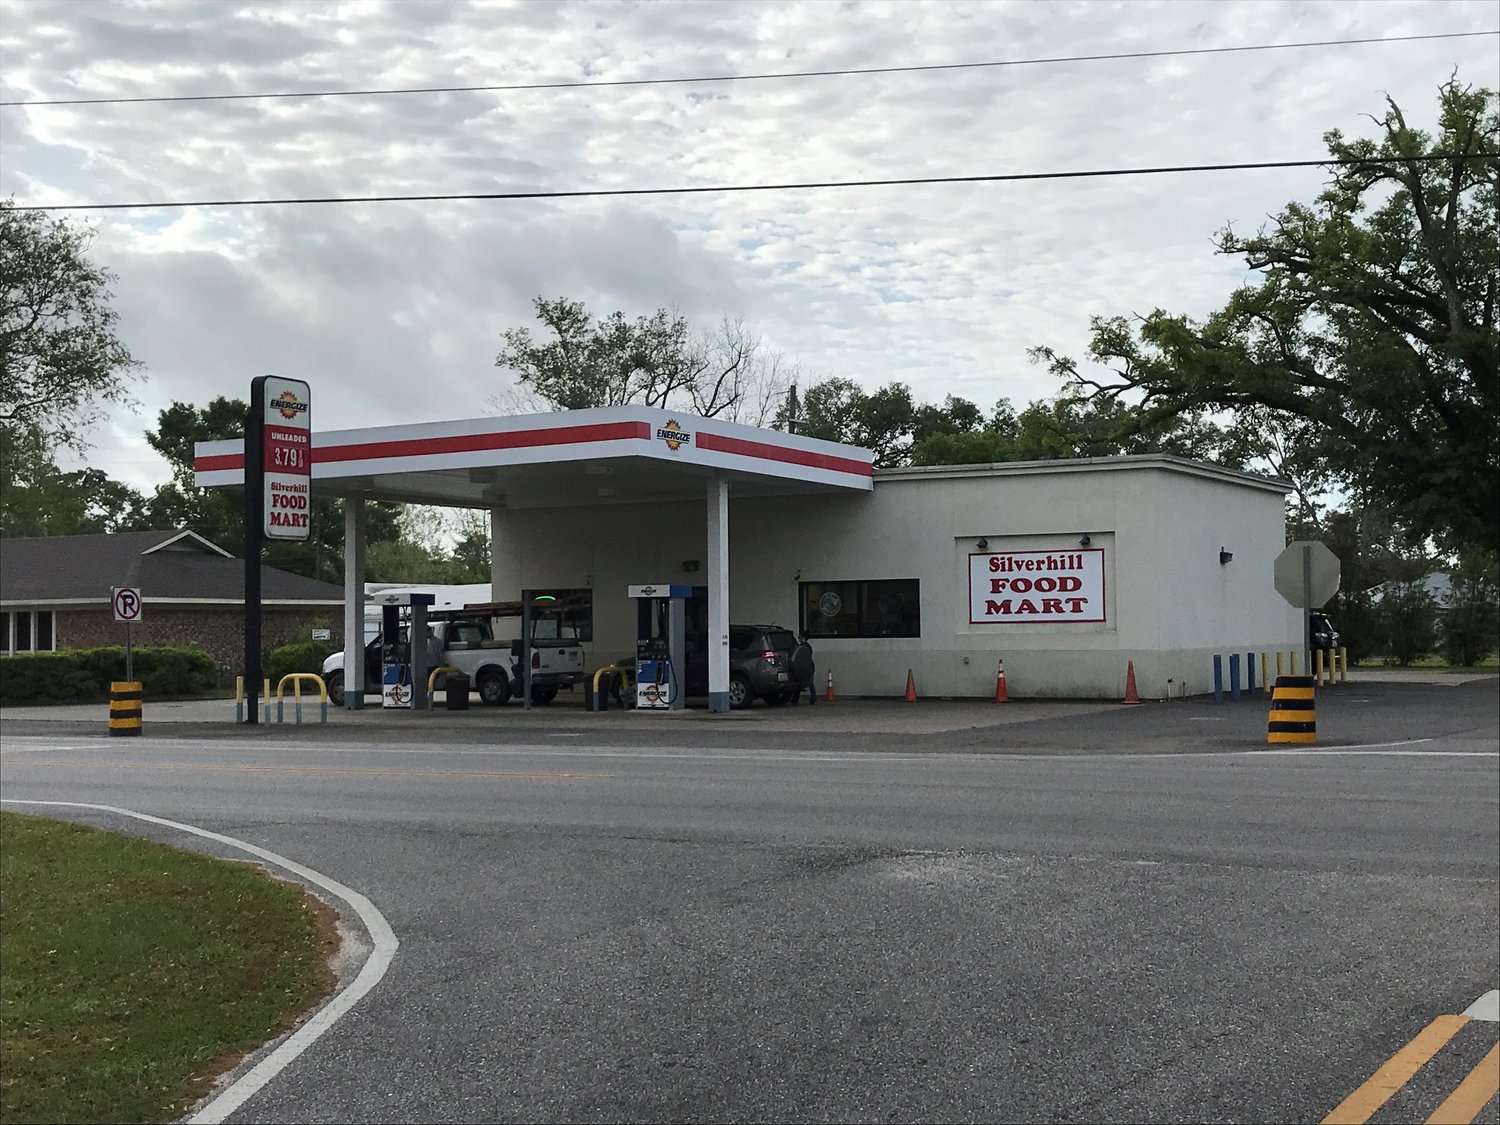 Silverhill suspended its town fuel tax until Sept. 1 to reduce the burden of high prices on drivers. The town charges 1 cent per gallon.